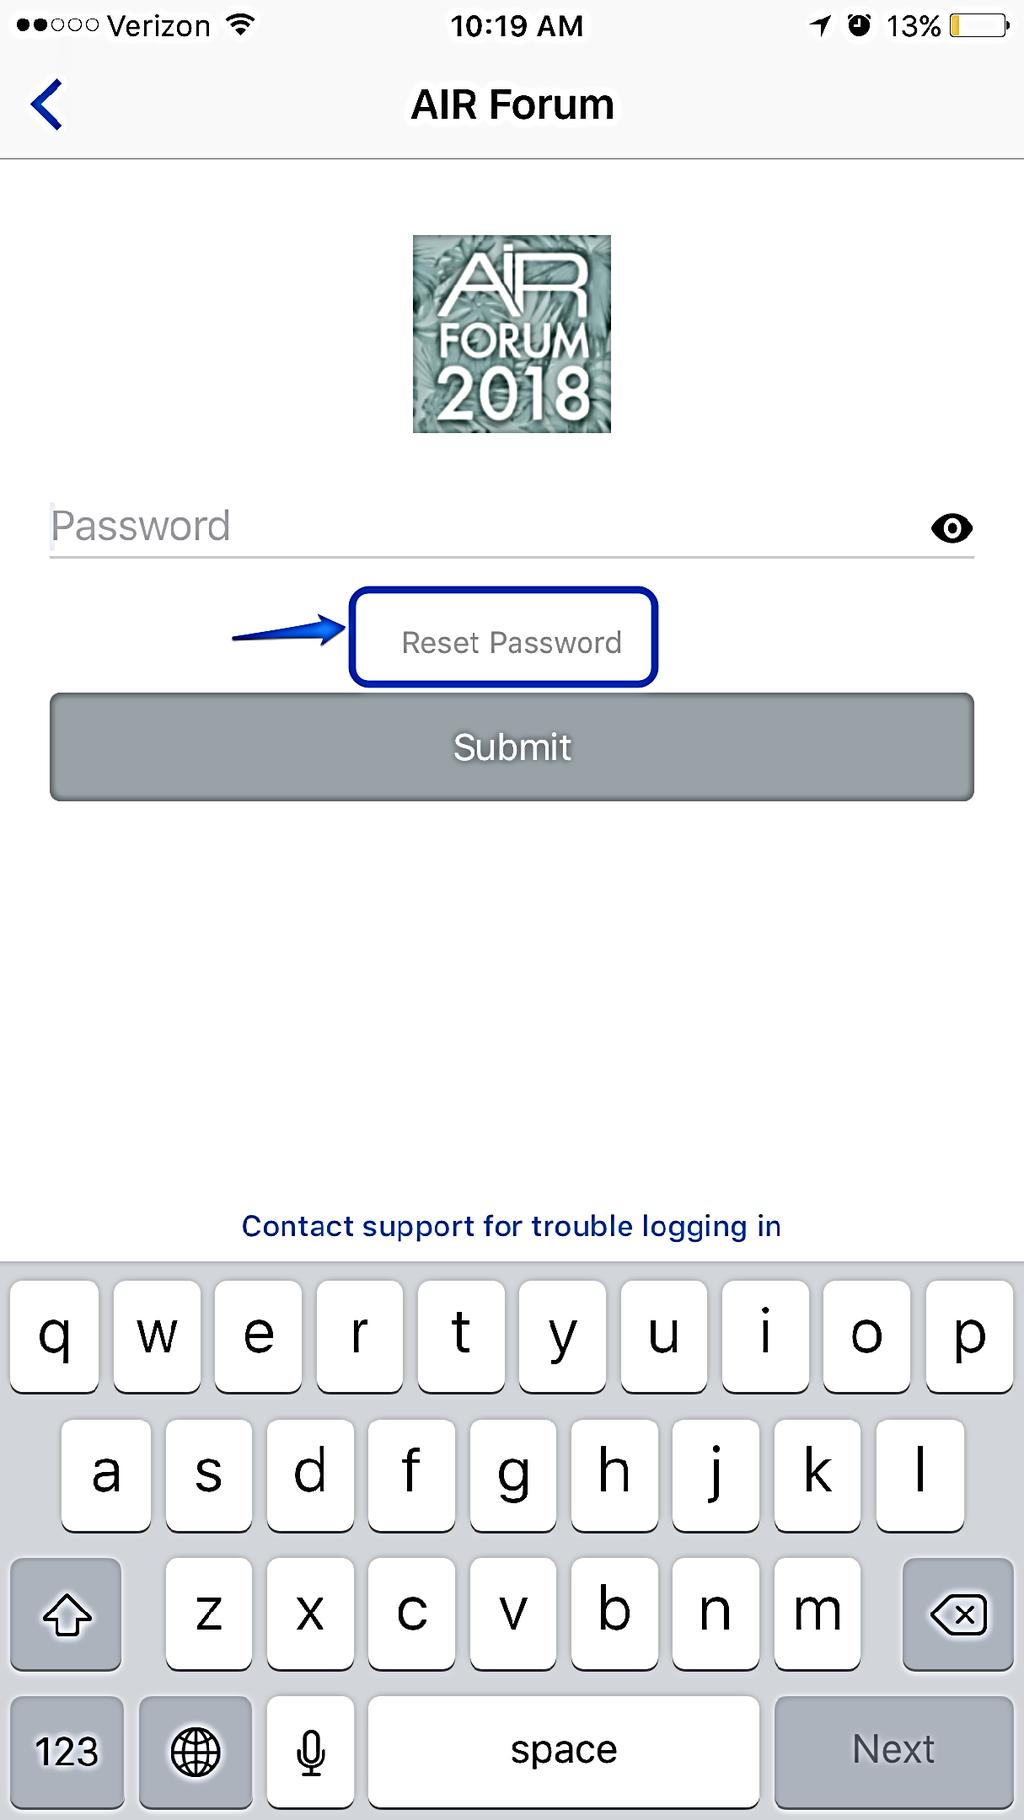 Lost/Forgotten Password mobile app 1. If you would like to reset your existing password: 1.